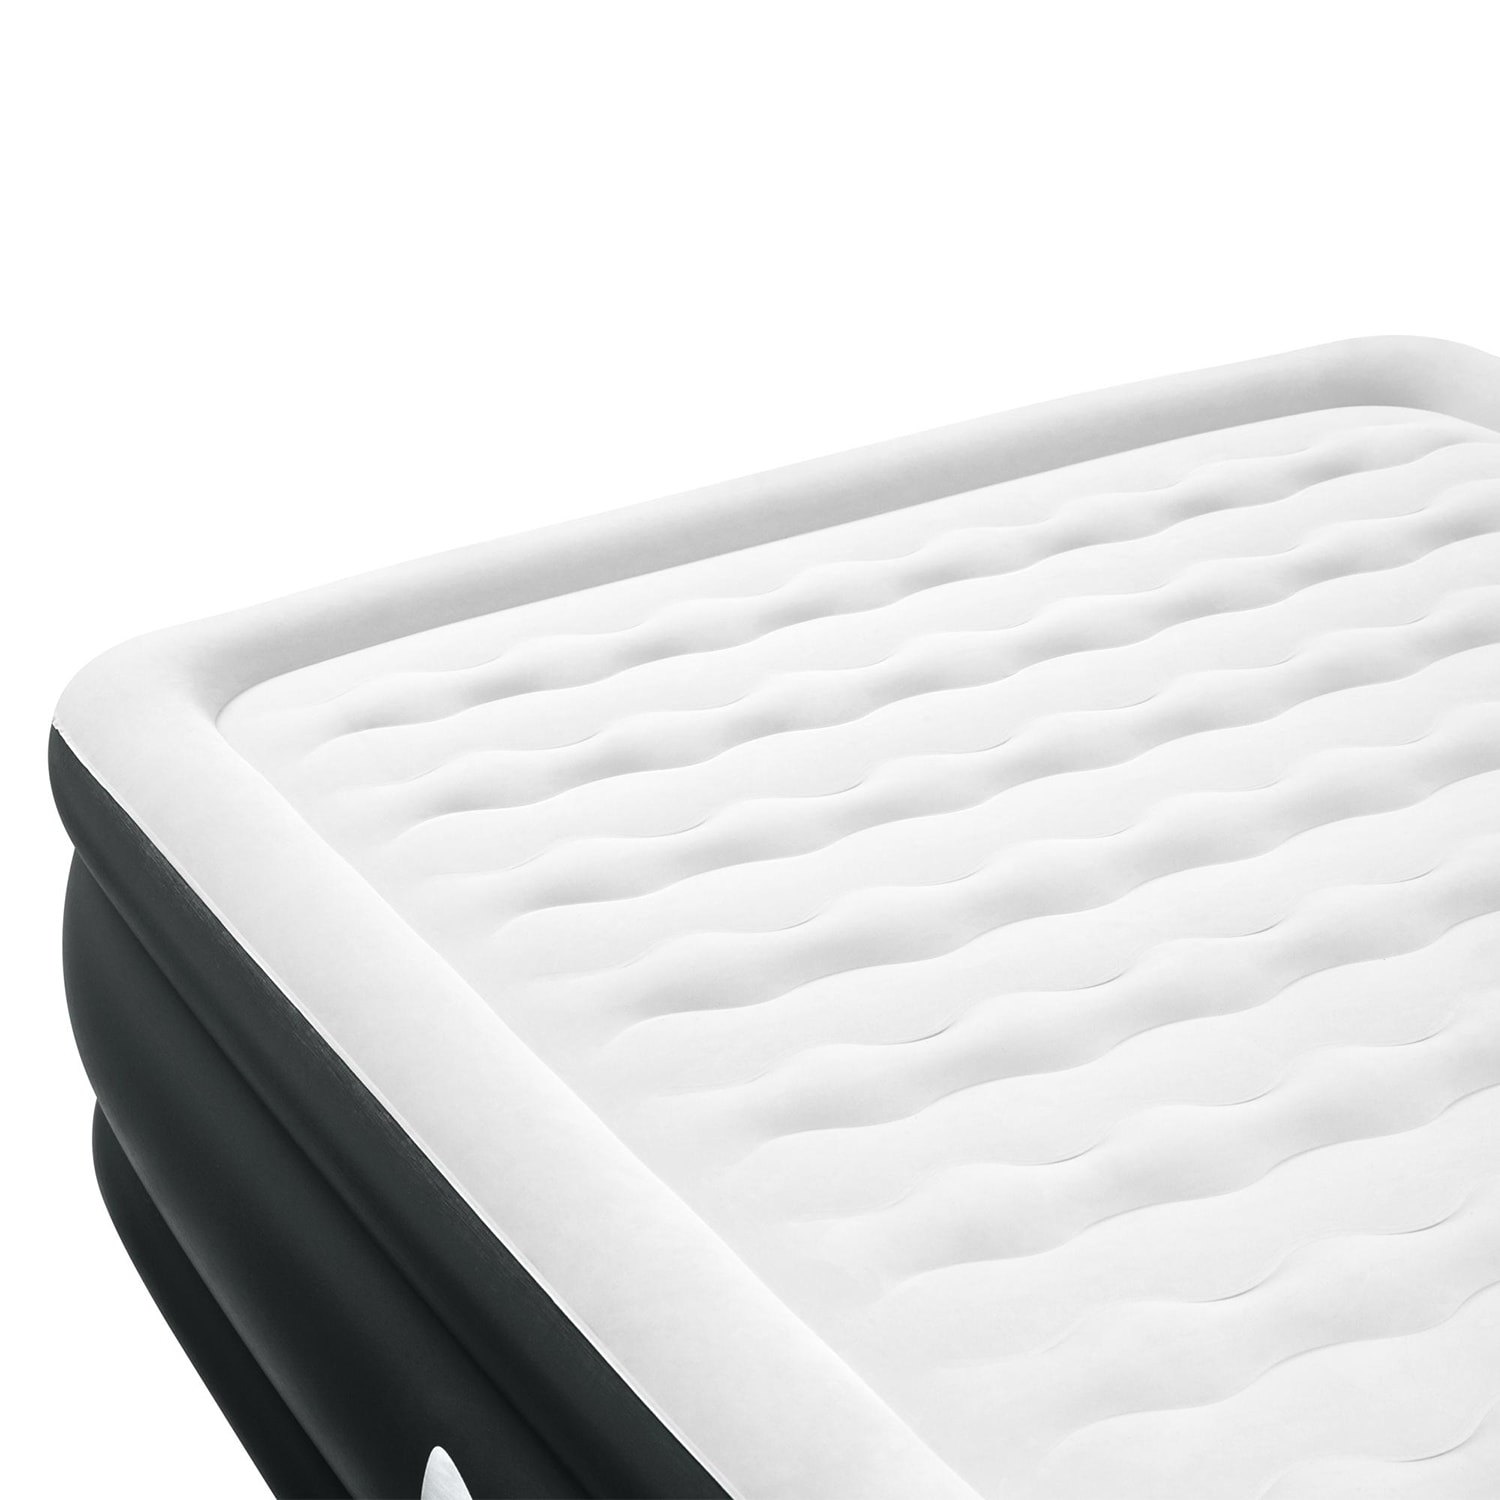 Bestway Fortech 31-in Double High Queen Air Mattress with Built-In Pump (2  Pack) - Brown PVC Airbed for Indoor Use - Carrying Case Included in the Air  Mattresses department at